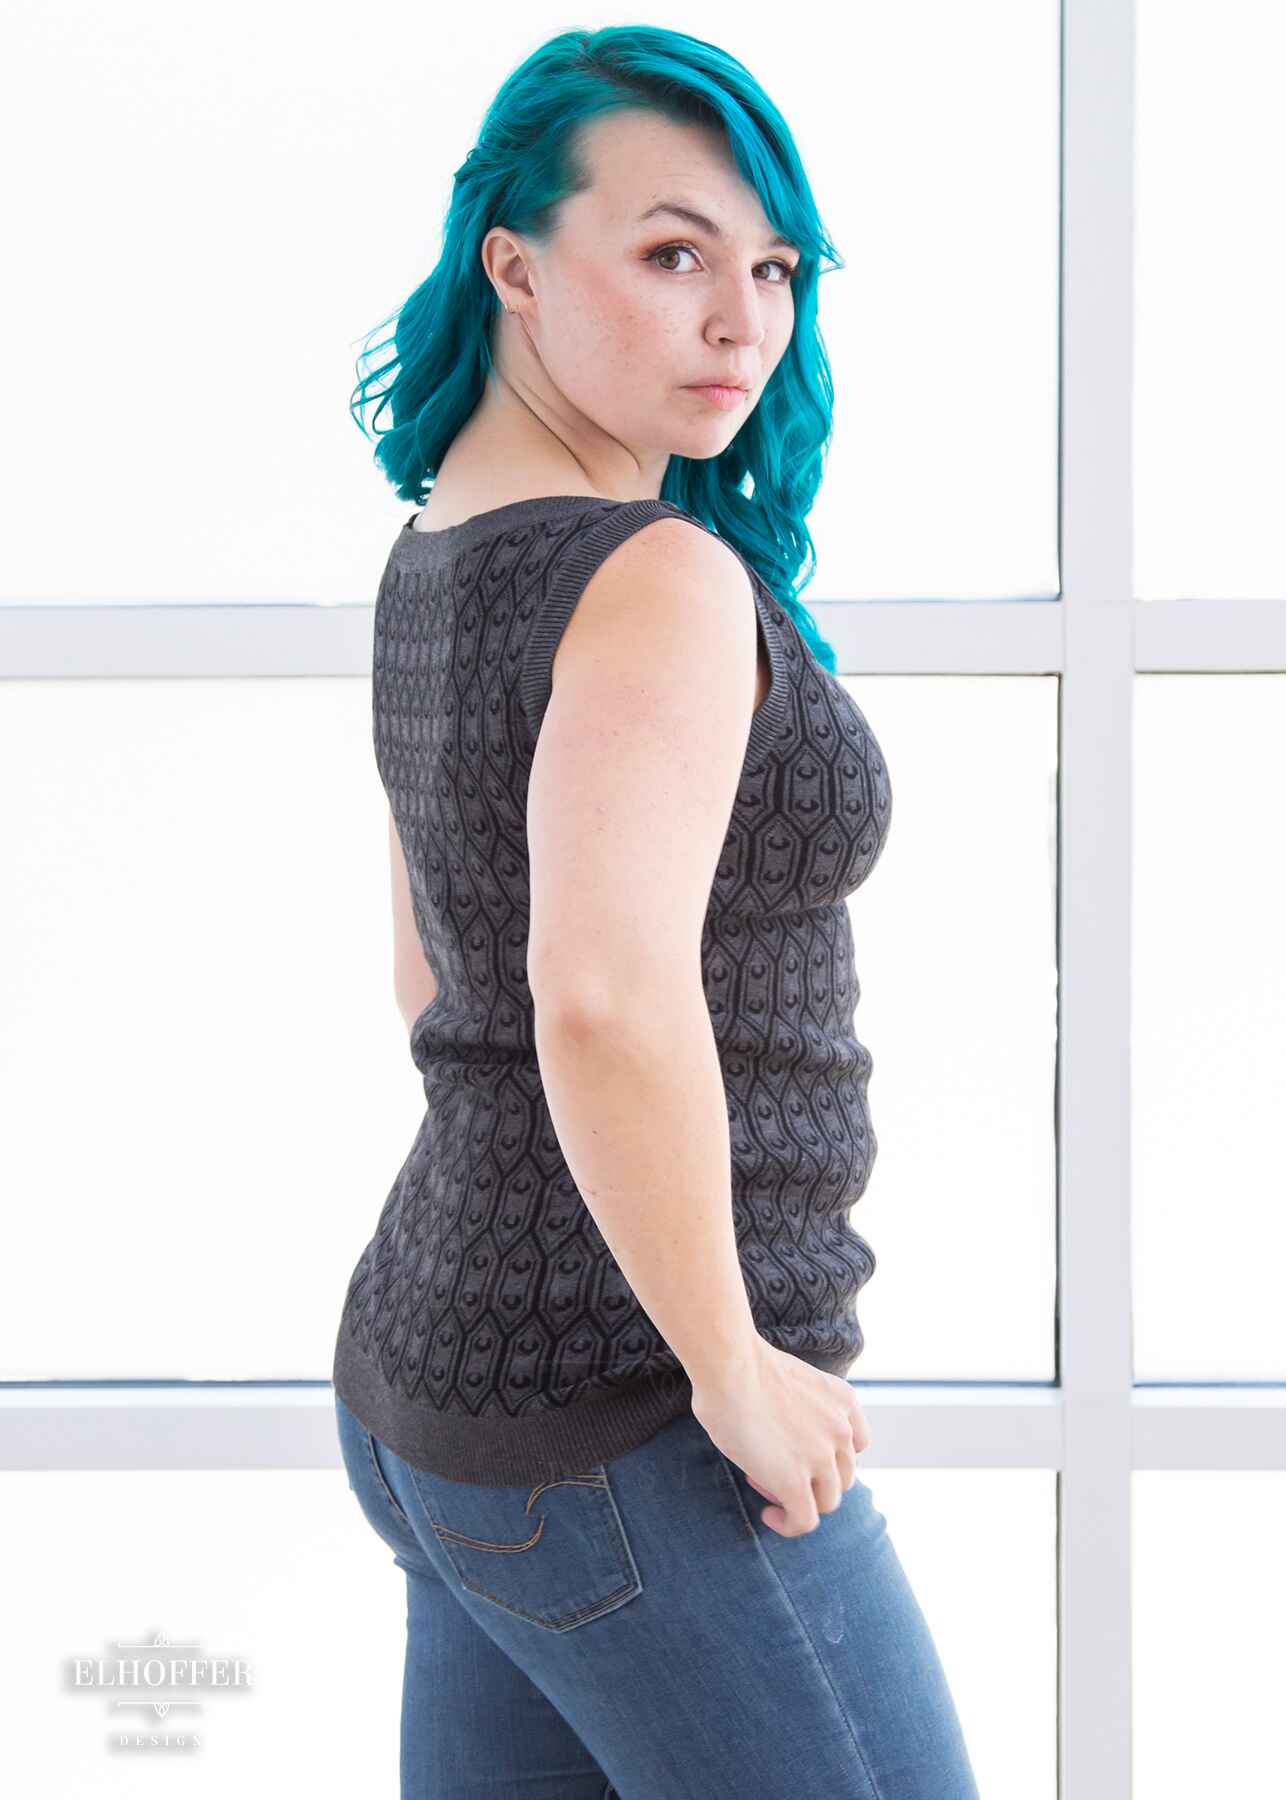 A side view of Kiri, a fair skinned S model with long wavy teal hair, wearing a knit sleeveless top with a boatneck and an armor plated design.